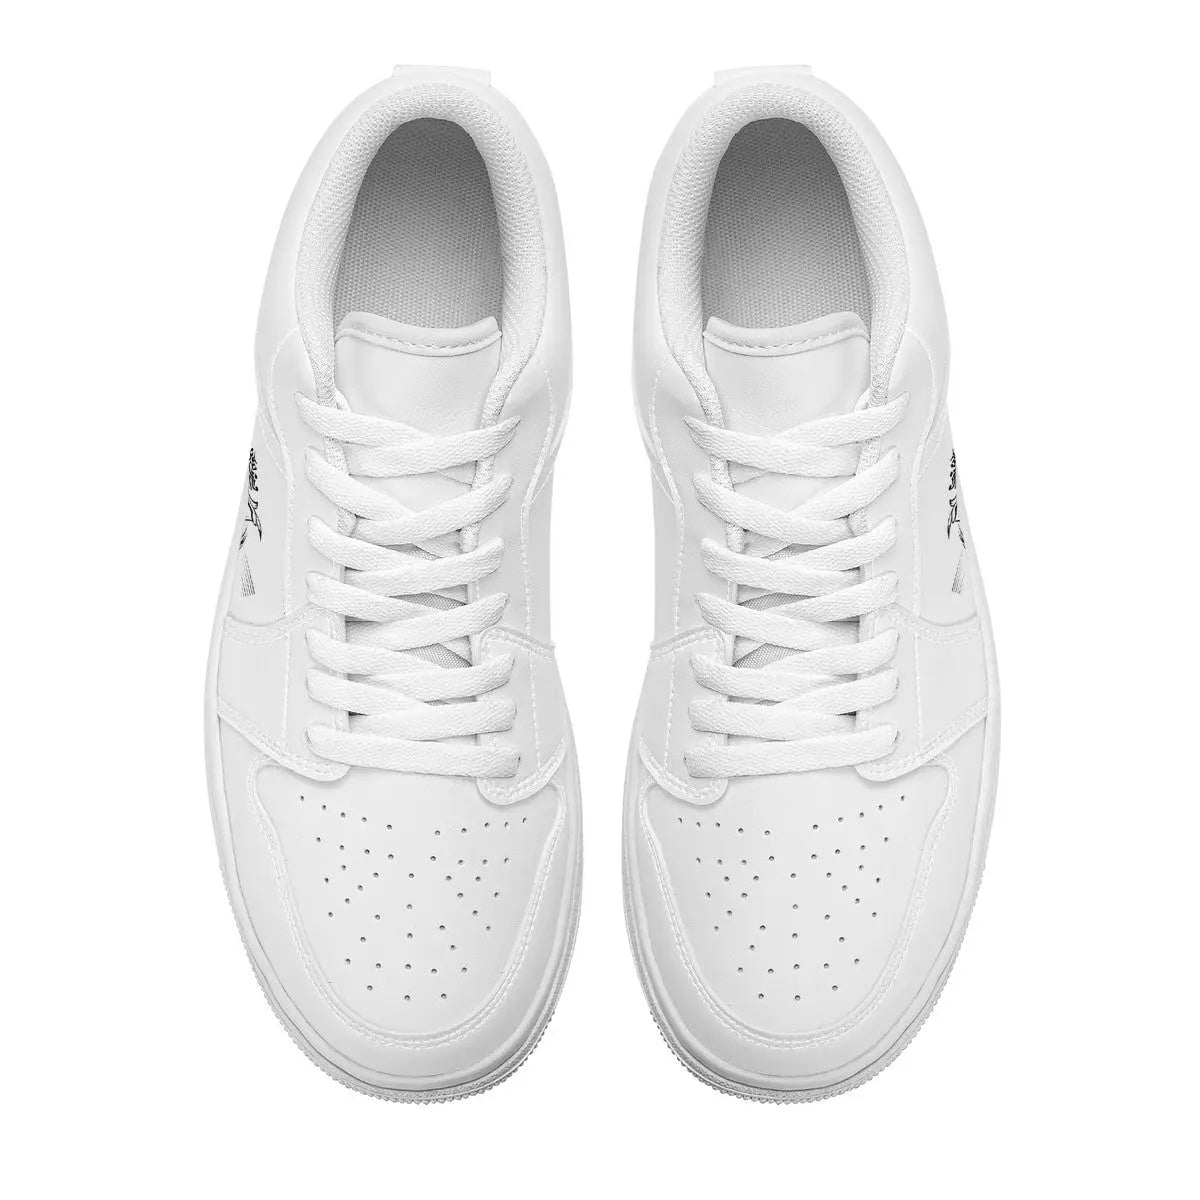 ClassA1 Emblem Low Top Sneakers - White - Low-Top Sneakers at TFC&H Co.